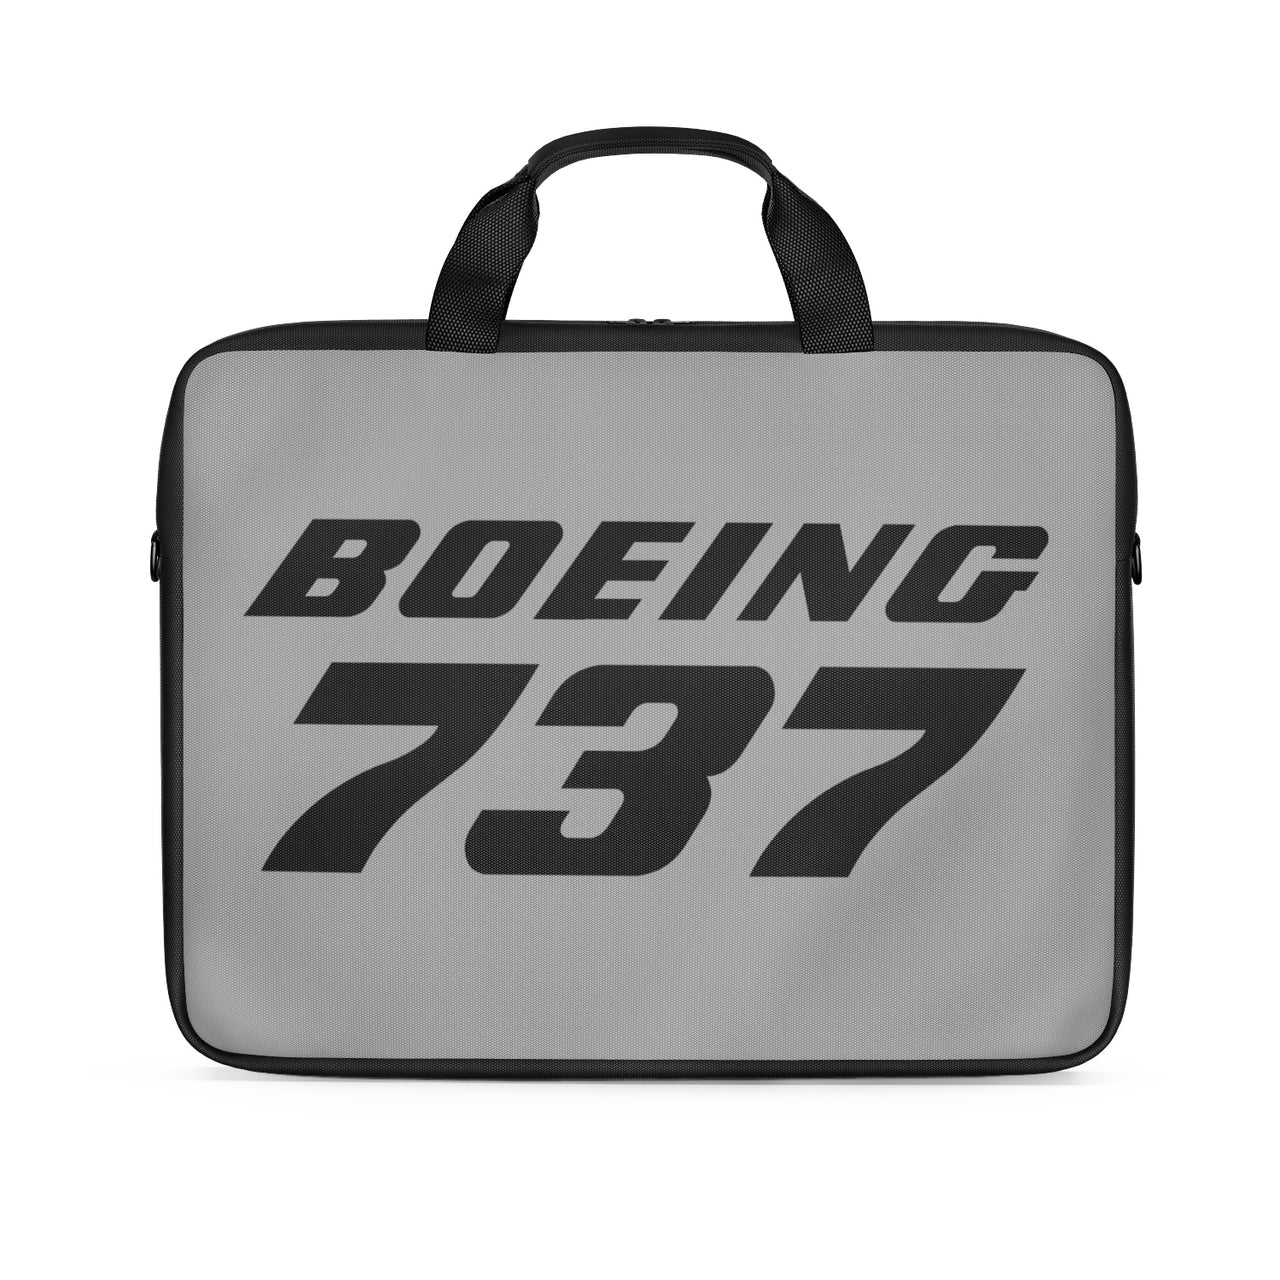 Boeing 737 & Text Designed Laptop & Tablet Bags